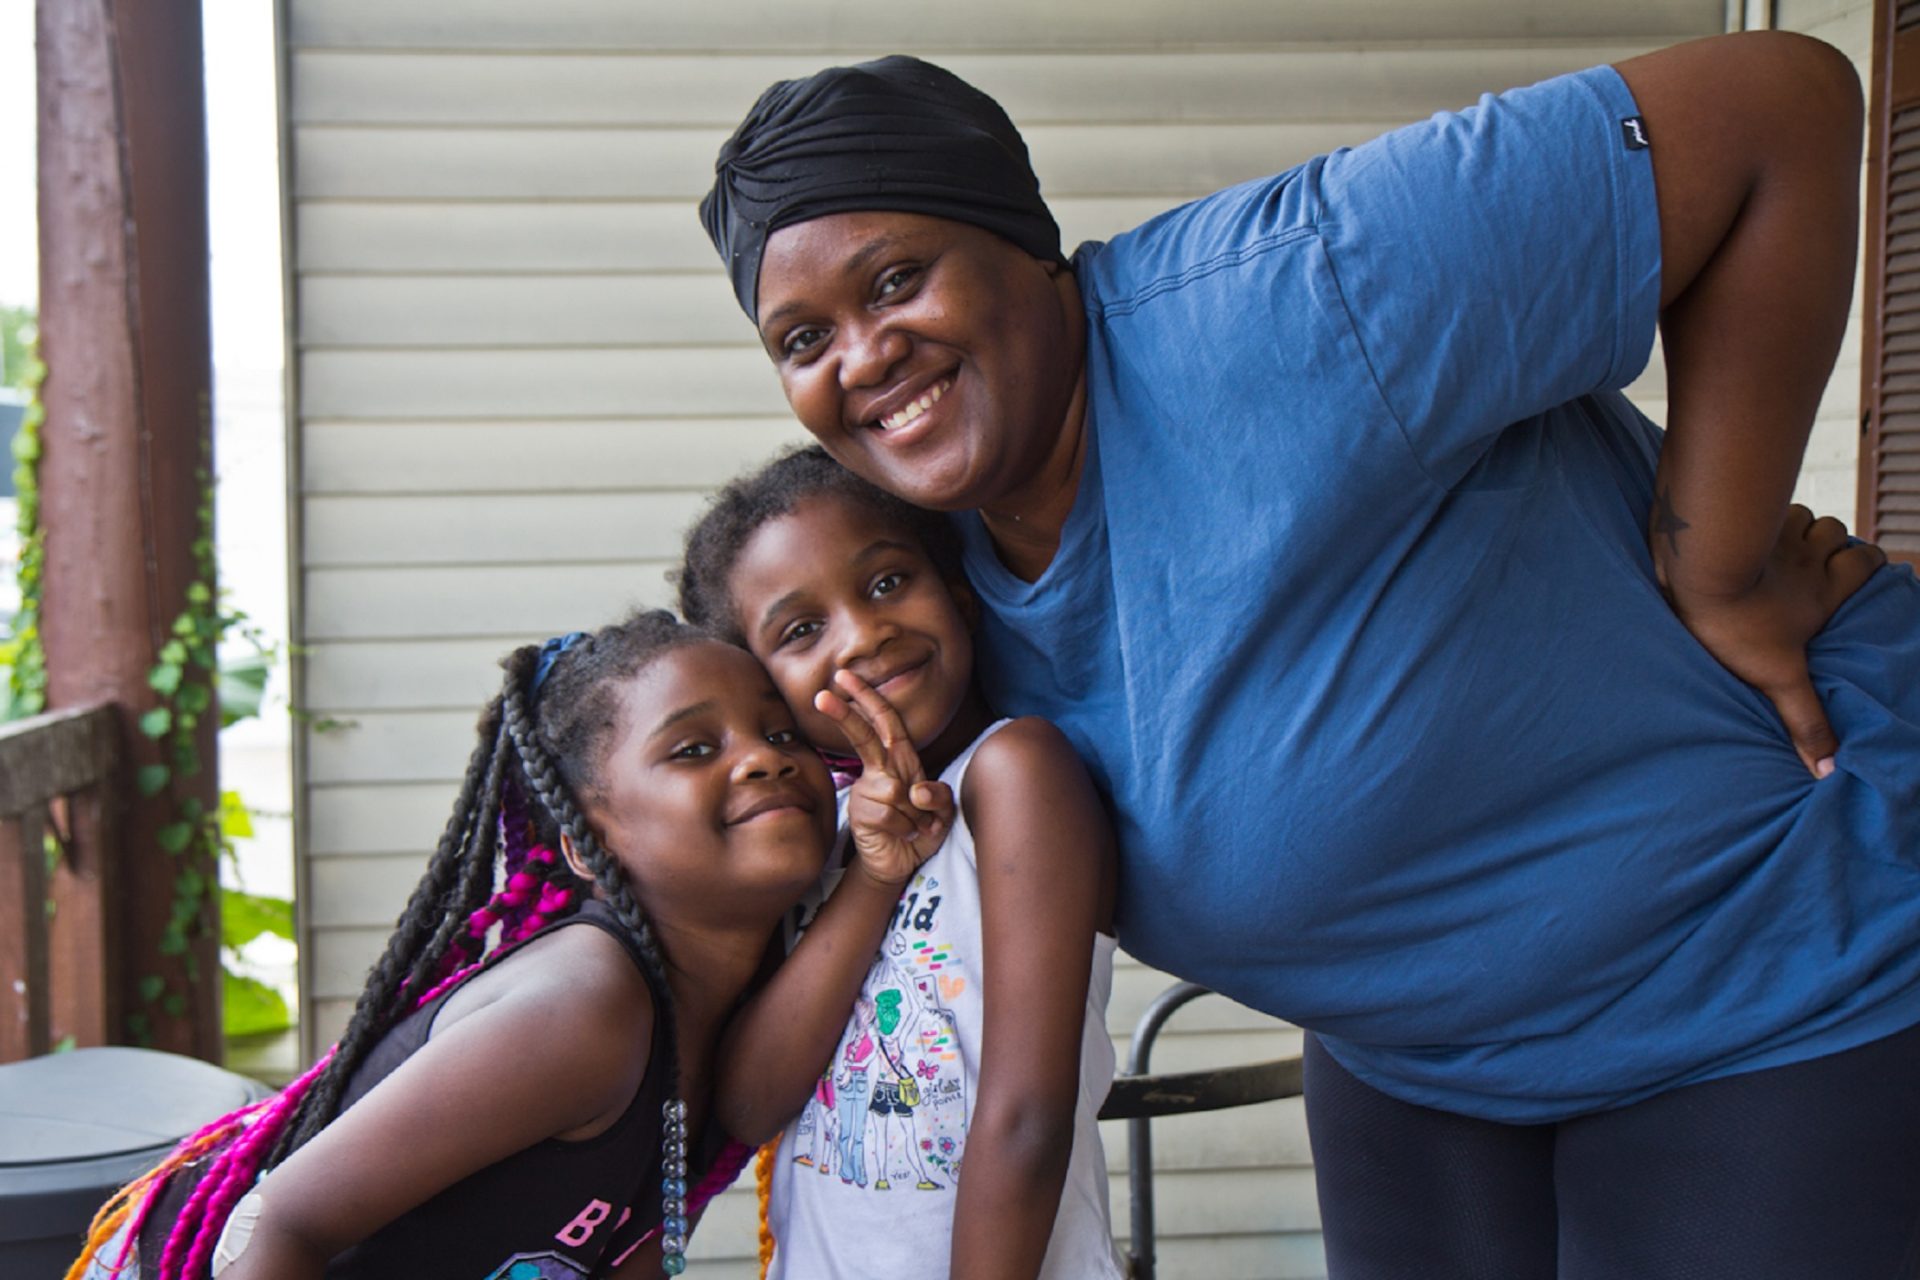 Antonia Gunter, a child tax credit recipient, with her twin daughters Gabriella and Isabella, 6, outside their home in Philadelphia.